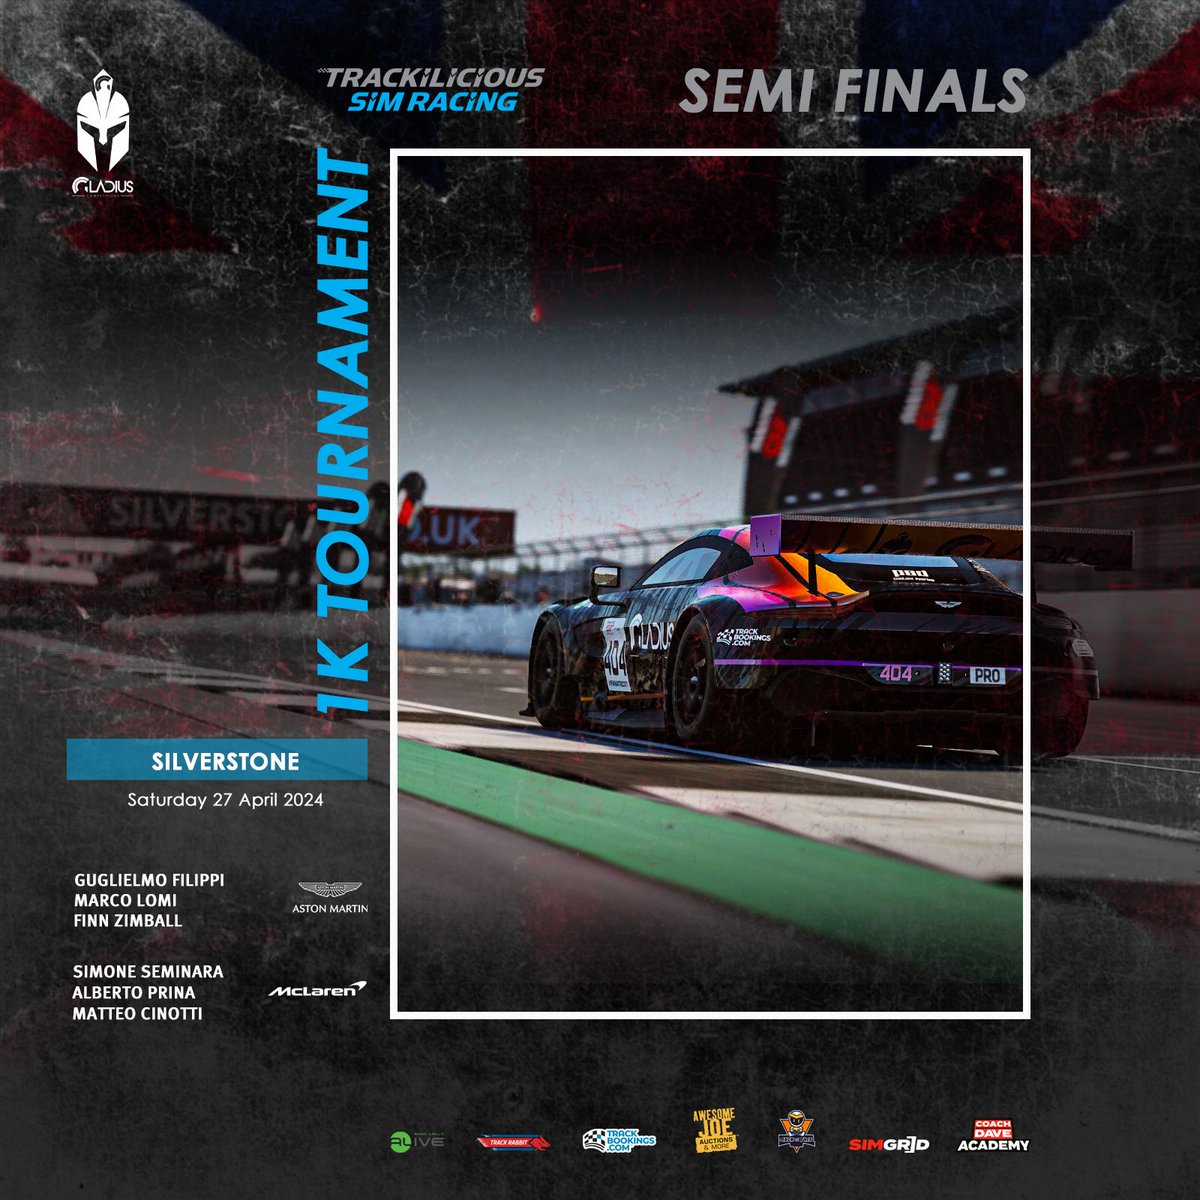 1K Tournament by @trackilicious1 , we're in the semifinals with 2 teams @sim_grid Racing on @AC_assettocorsa Competizione Live On I twitch.tv/TRACKILICIOUS